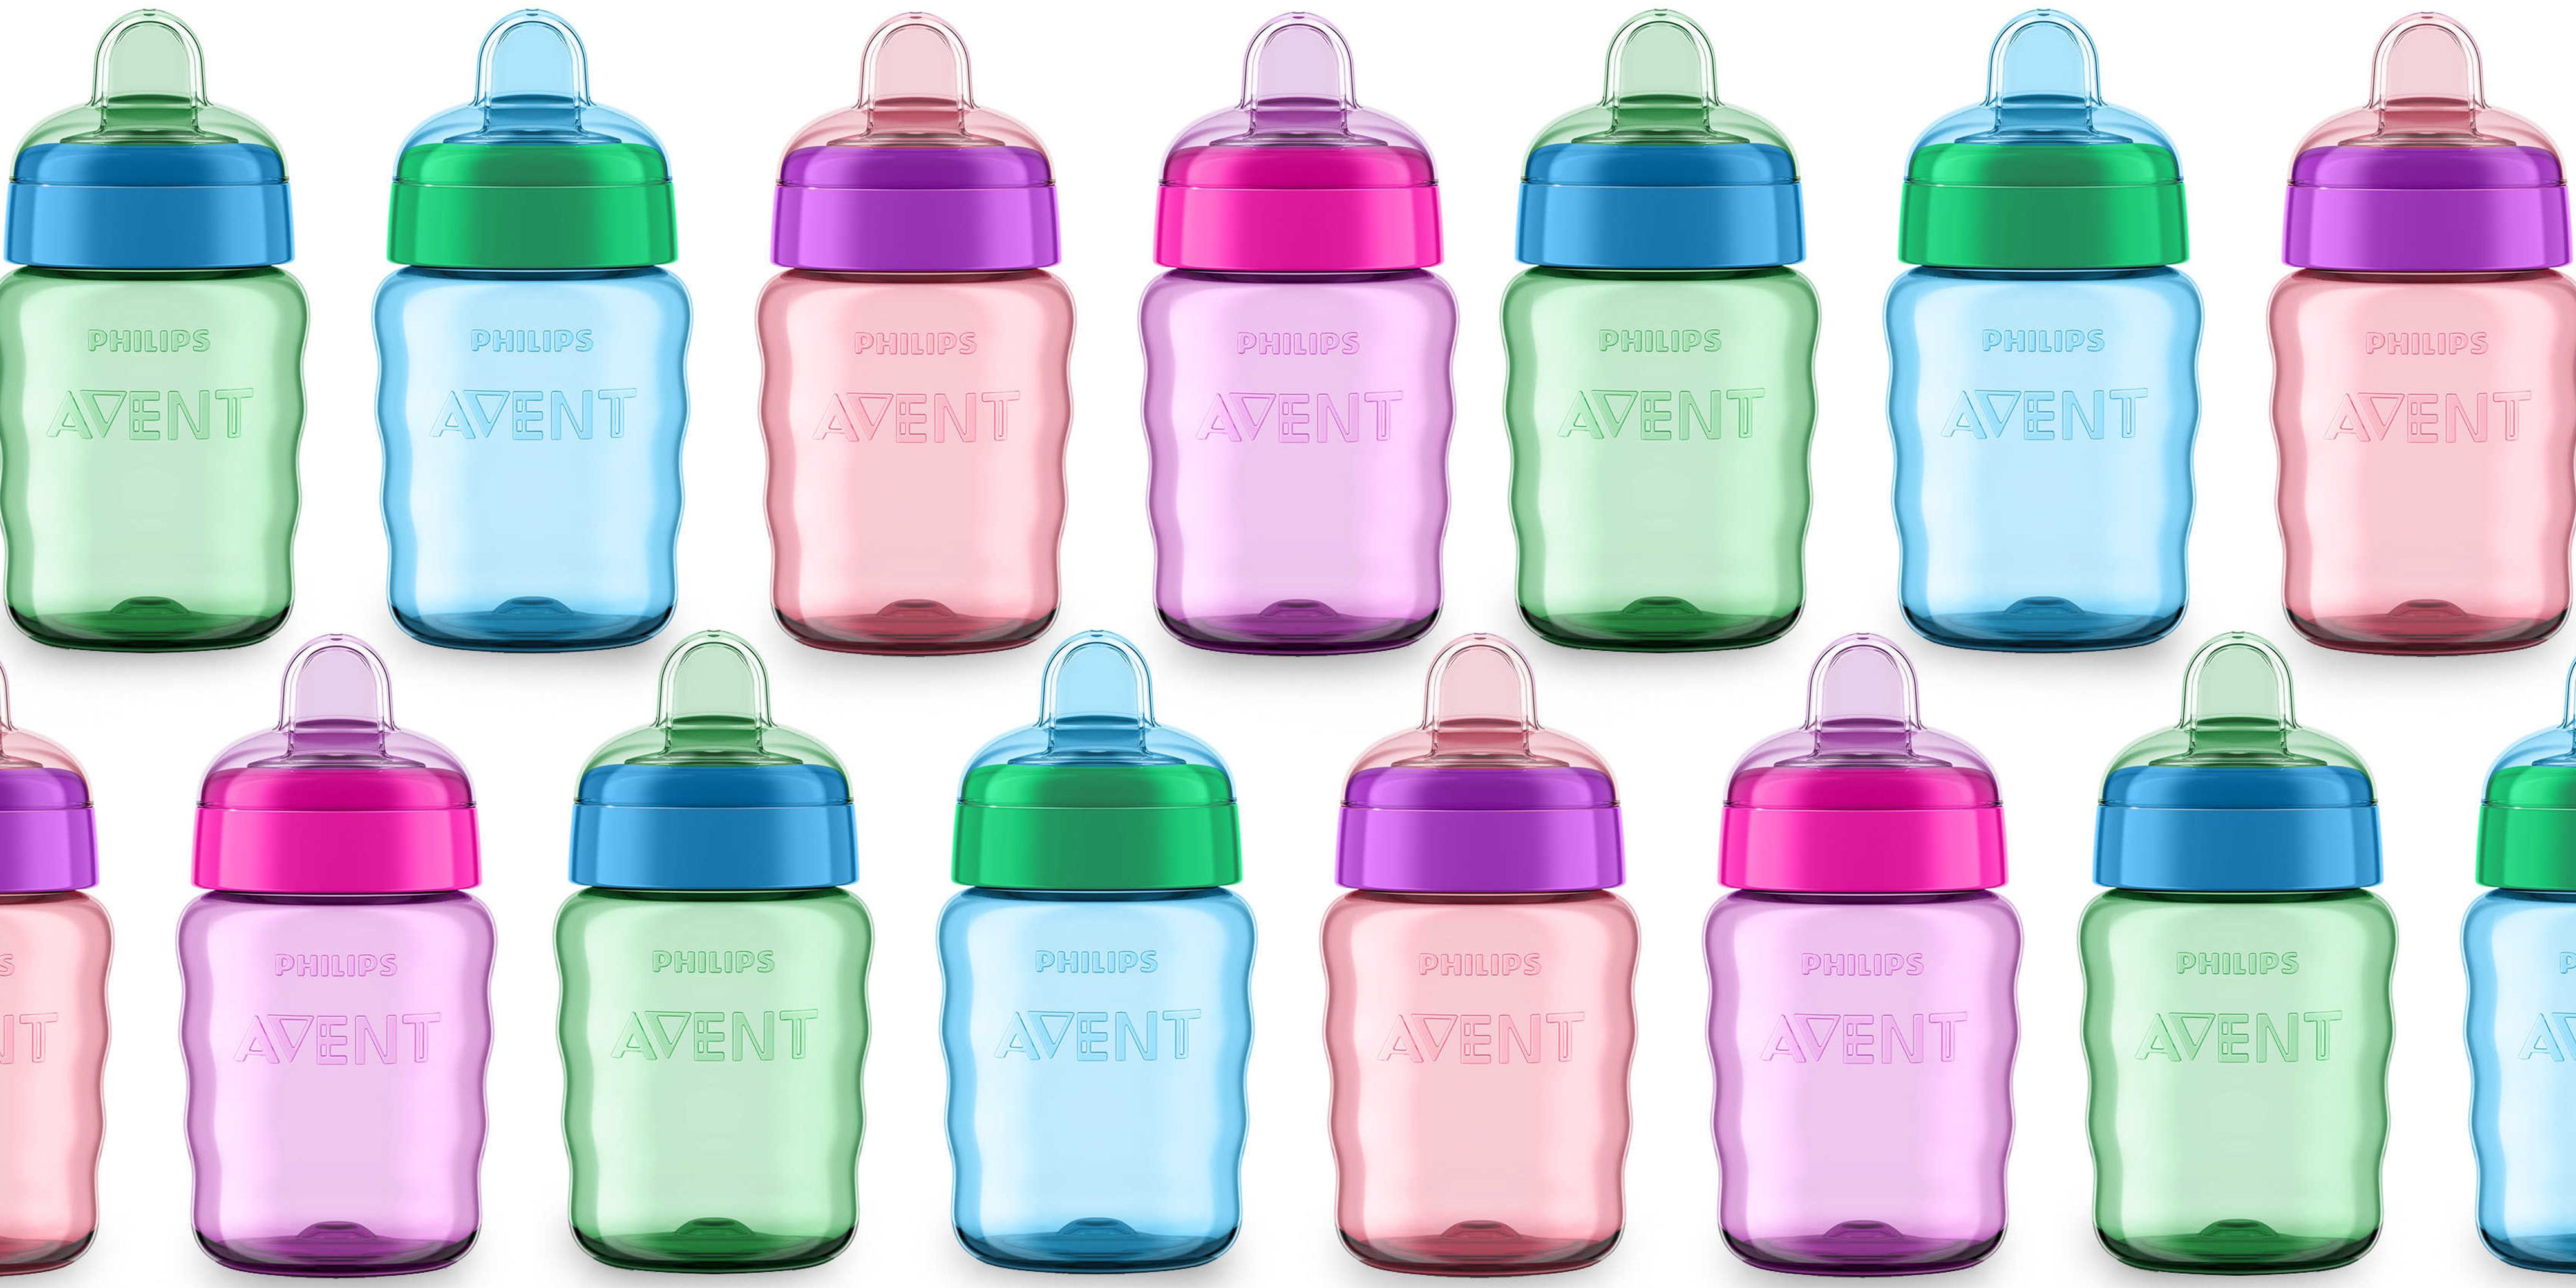  Nuk First Essentials Hard Spout Sippy Cup in Assorted  Colors-10 Ounce (Pack of 1 ) : Baby Drinkware : Baby